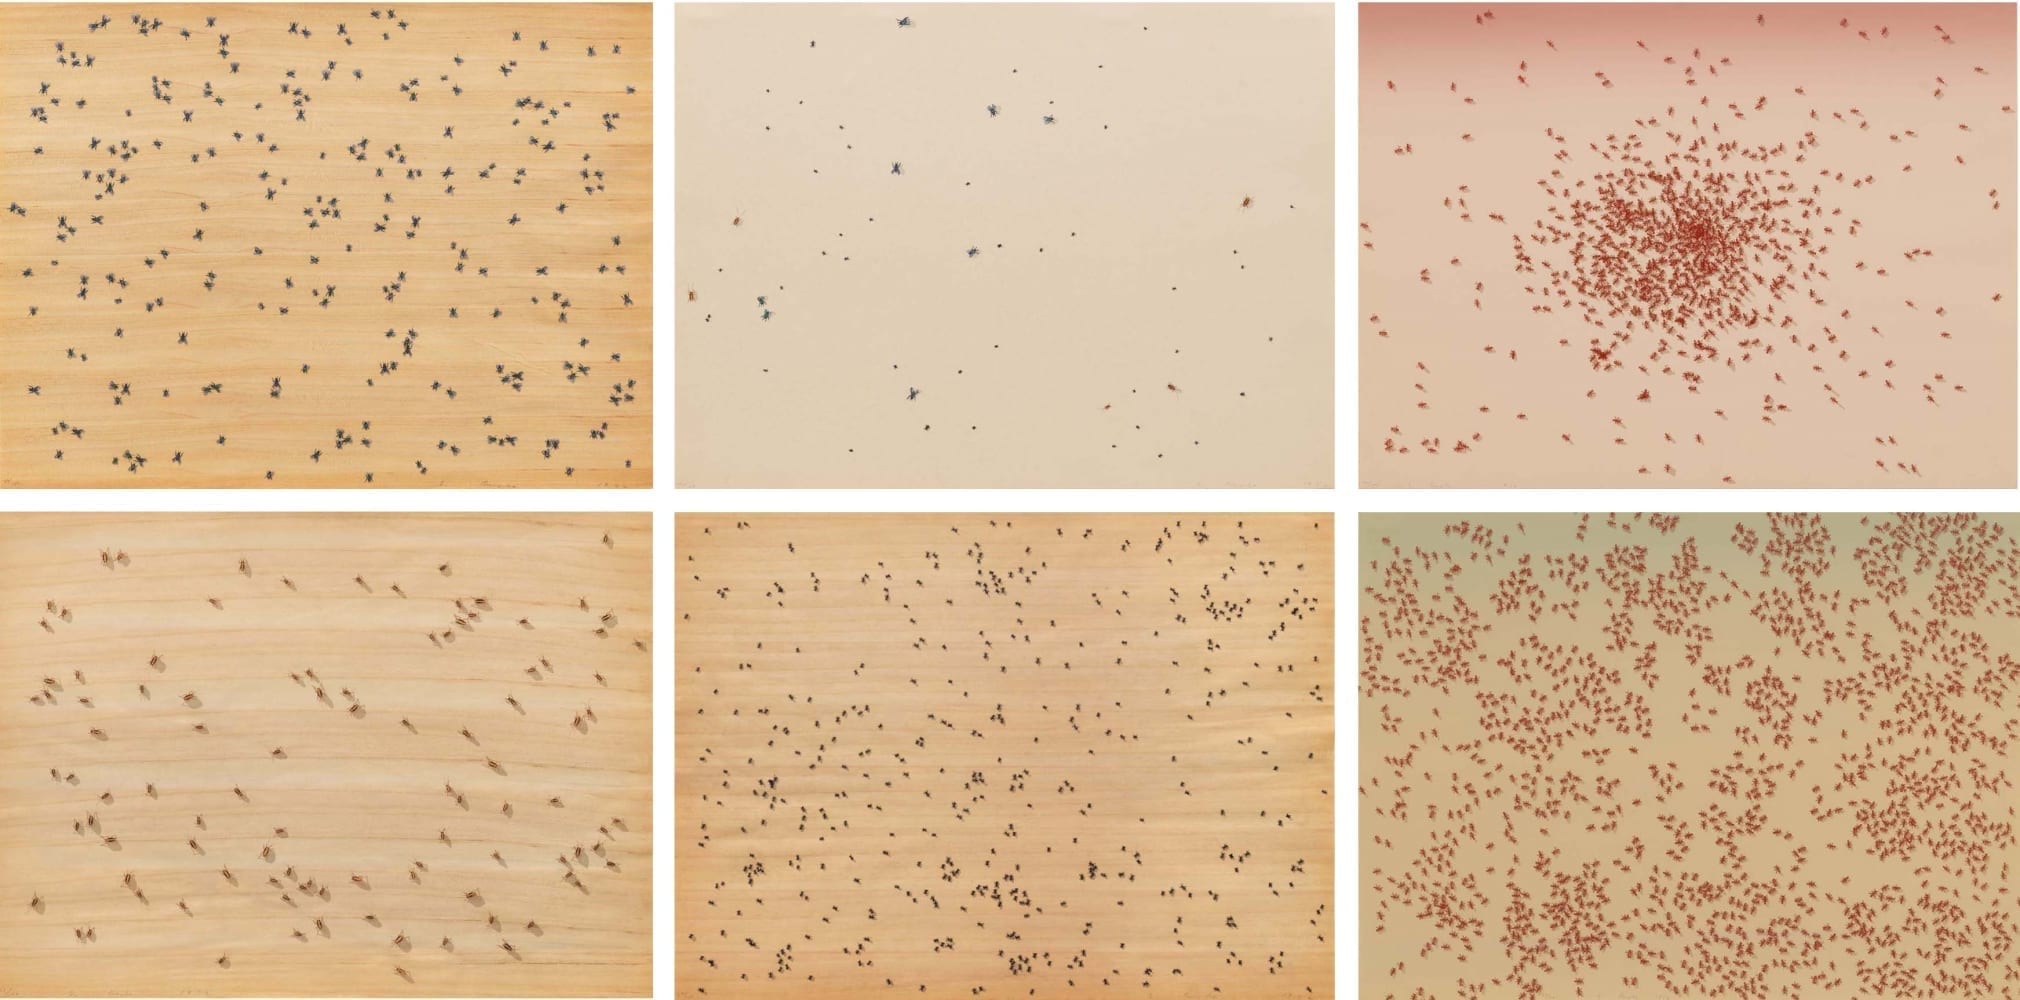 Insects by Edward Ruscha